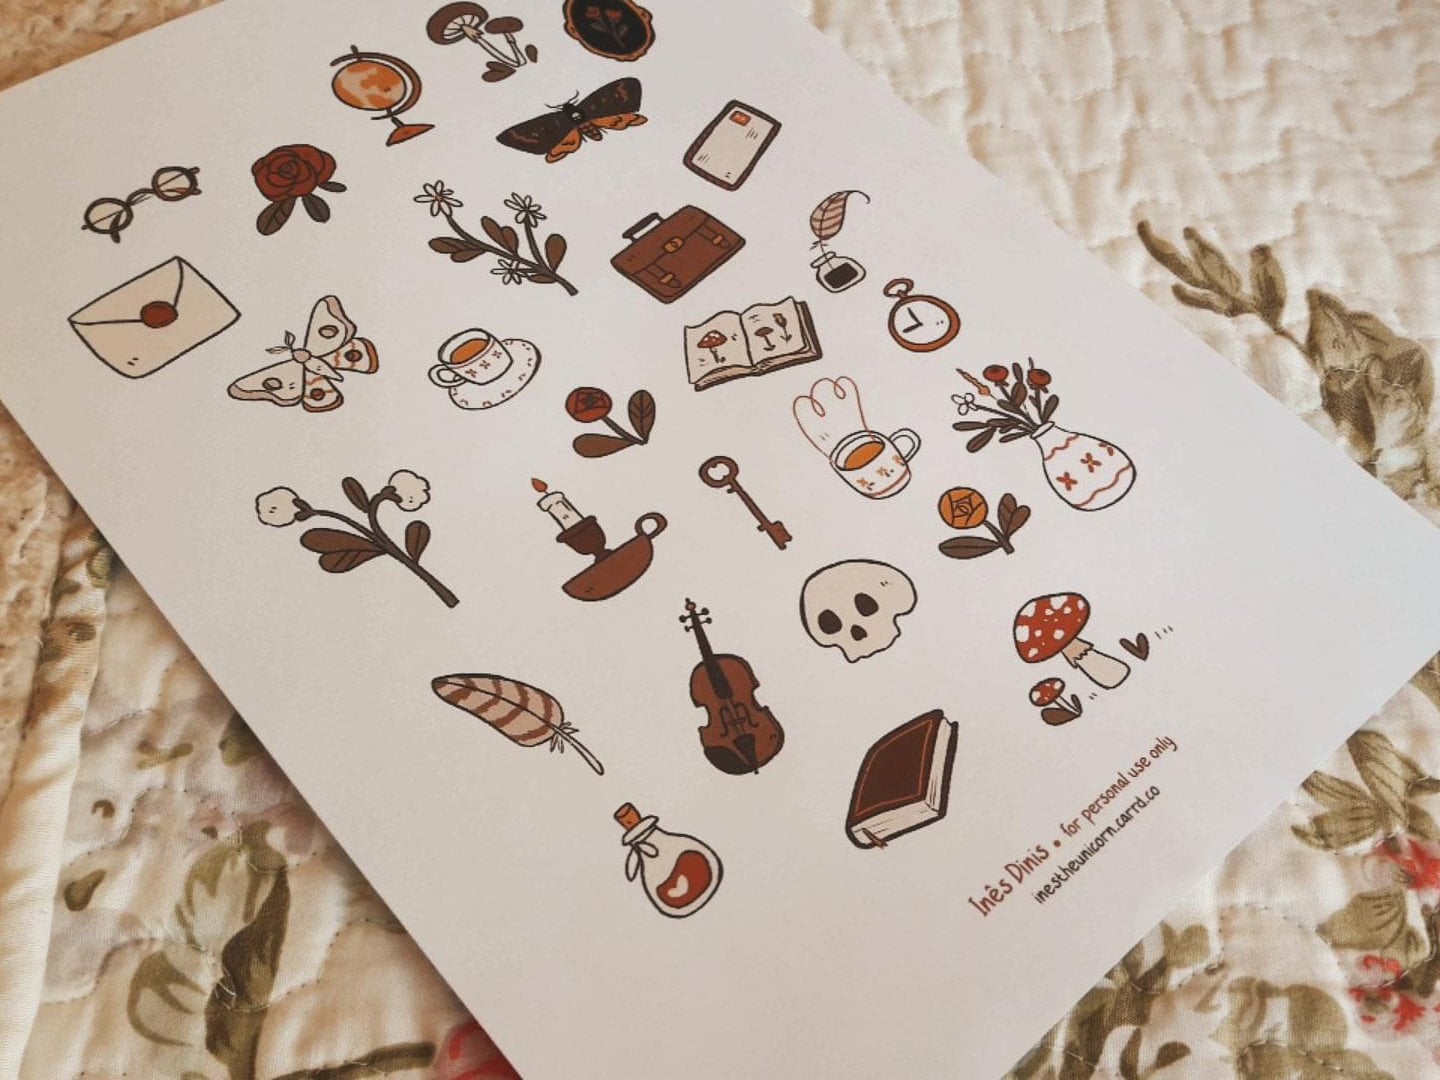 Dark Academia // 15 pcs Cute and Aesthetic Deco Stickers for